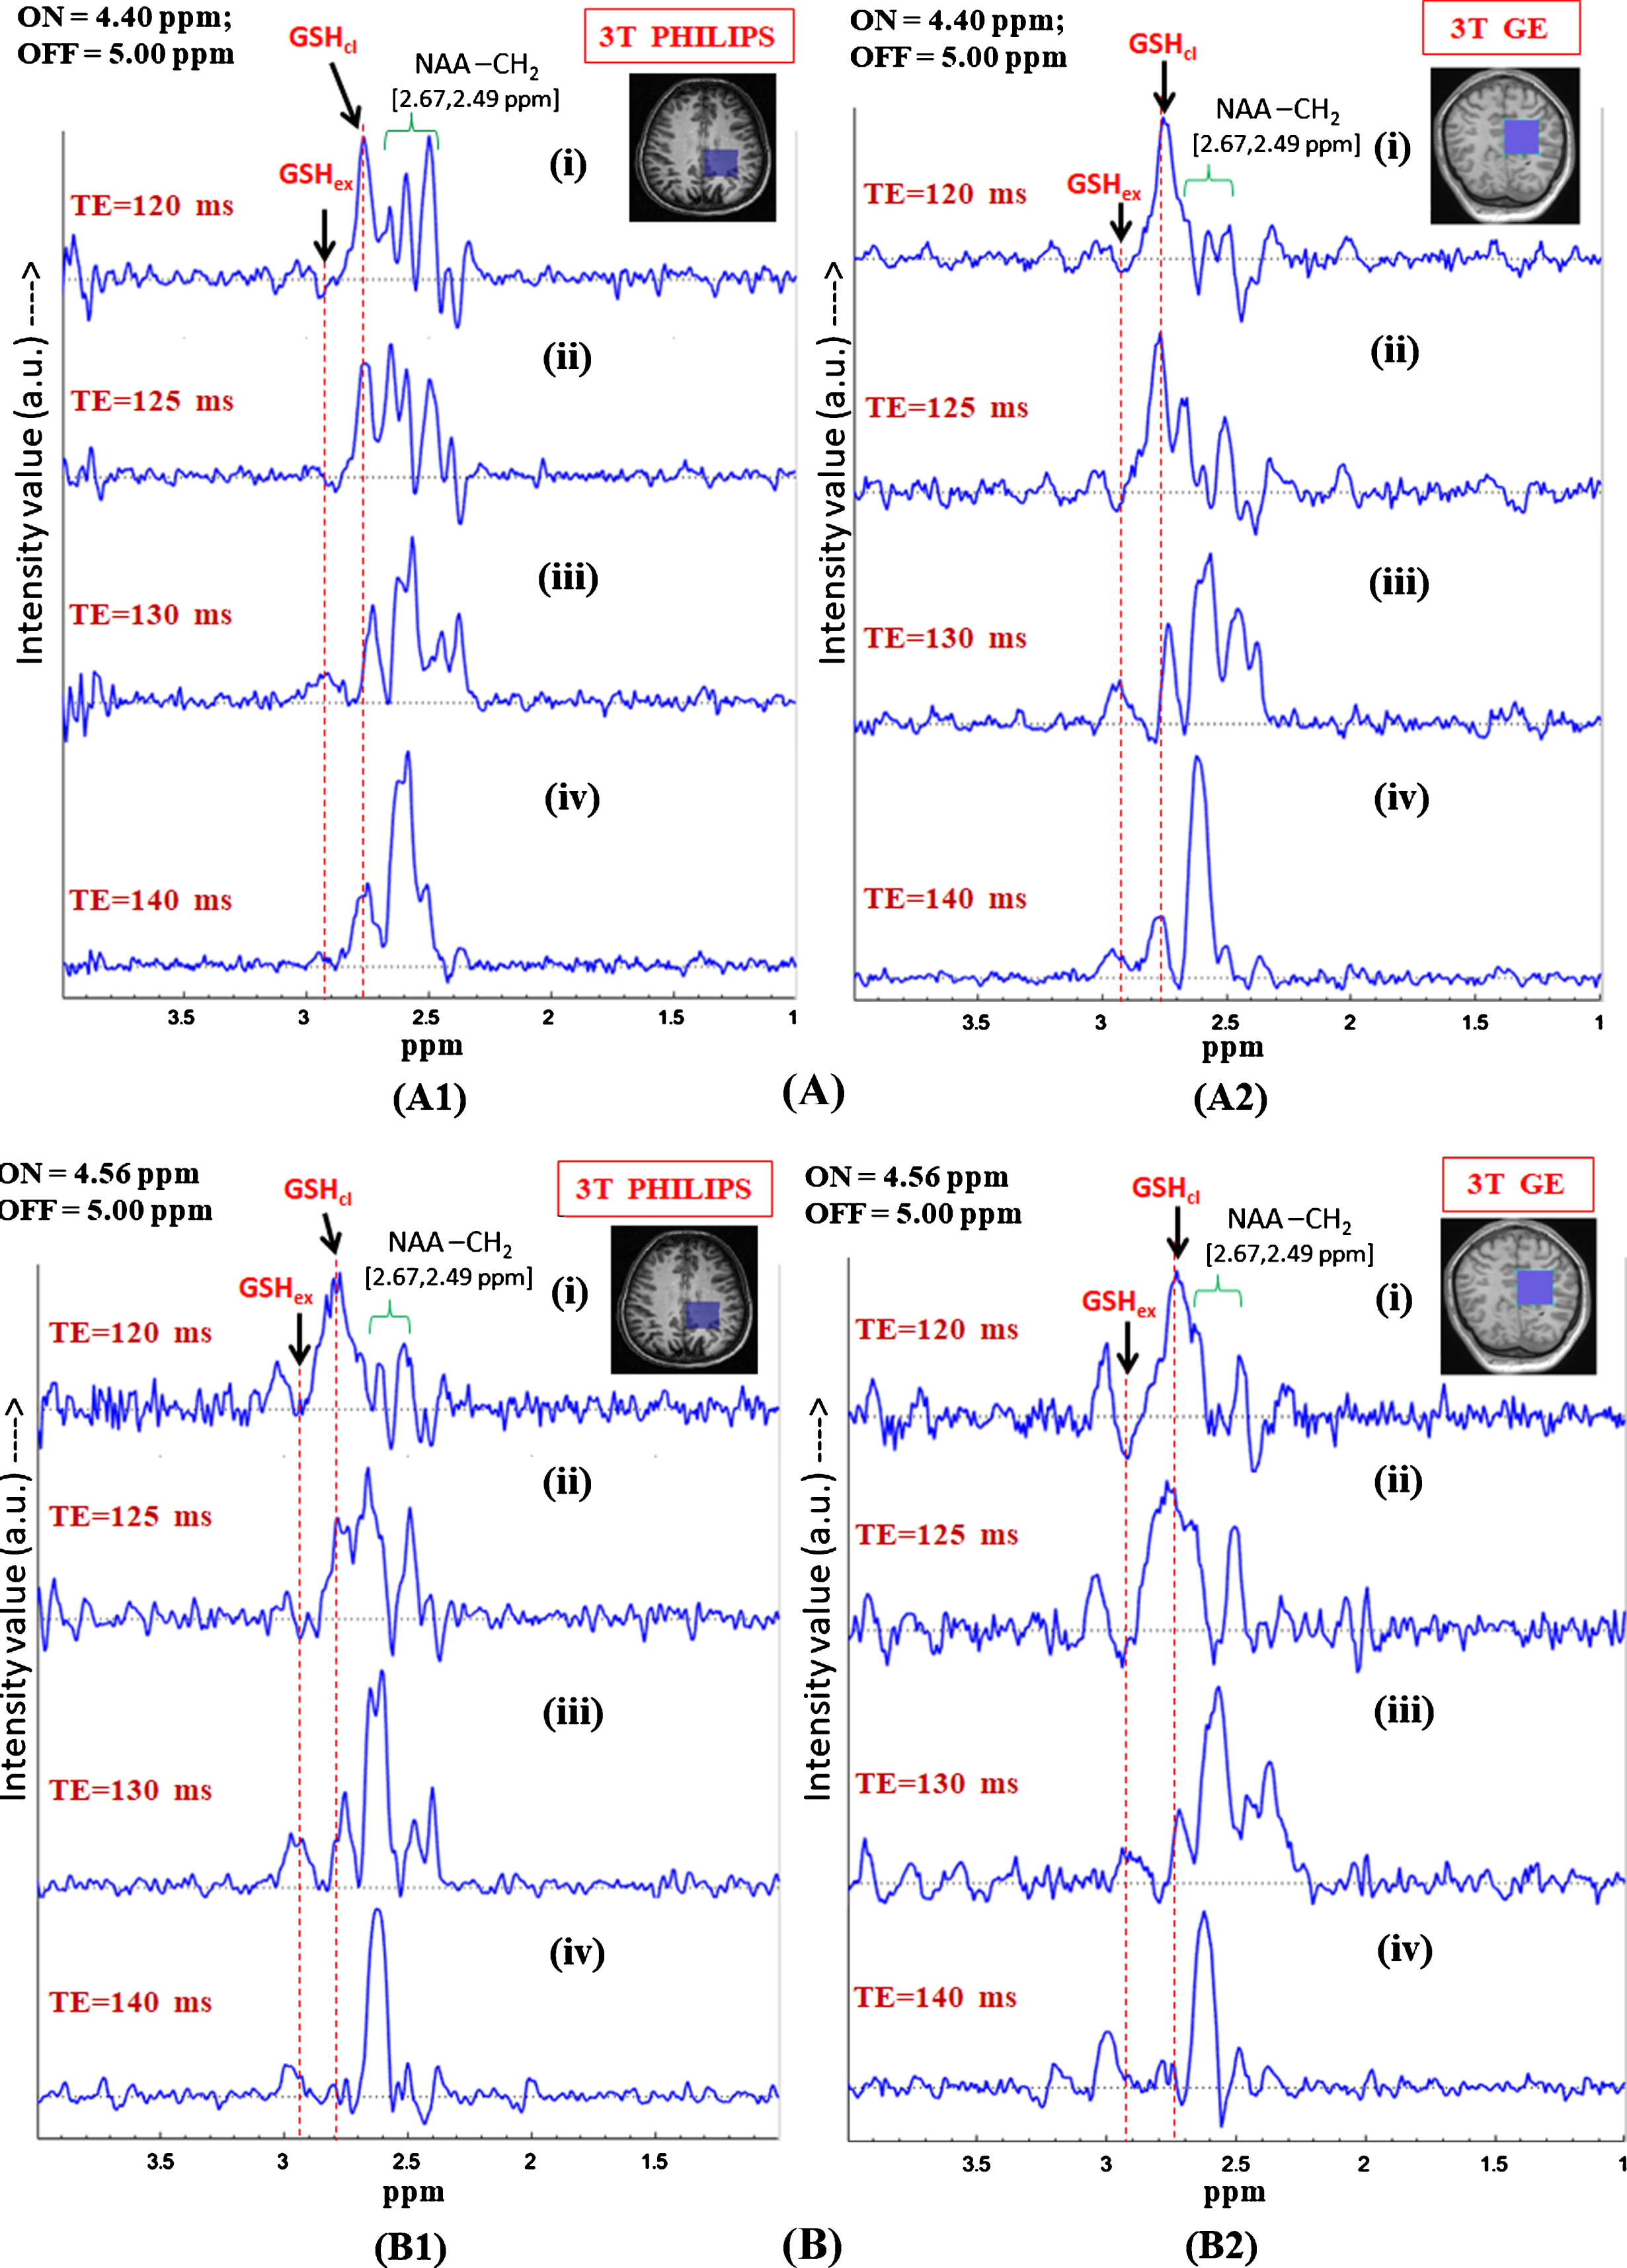 In vivo GSH conformer detection using MEGA-PRESS sequence using 3T Philips and GE scanners with the two MEGA-ON pulse positions, i.e., 4.40 ppm (A) and 4.56 ppm (B) and analysis of relative peak positions and phase of the two GSH conformation using same experimental parameters. Effect of different echo times on the two MEGA-ON pulse positions using both the Philips and GE scanners has been demonstrated for variable TE (120 ms, 125 ms, 130 ms and 140 ms) using MEGA-ON pulse at 4.40 ppm (A) and at 4.56 ppm (B). The selective excitation 180° pulse is applied at 4.40 ppm (for closed conformer) and 4.56 ppm (for extended conformer) (TE = 120 ms and TE = 125 ms give the two out of phase conformer peaks while the same two peaks appear in-phase for TE = 130 ms and TE = 140 ms. Excitation with ON-pulse at 4.40 ppm gives a sharp and heightened peak at ∼2.80 ppm and a broad peak at ∼2.95 ppm; however, ON-pulse at 4.56 ppm results in nearly equal peak shapes and area at two different positions) as the two GSH conformal peaks). The peaks are labeled as: GSHex refers to Cys-Hβ extended form; GSHcl refers to Cys-Hβ closed form; NAA-CH2 refers to NAA-Aspartate CH2 group.